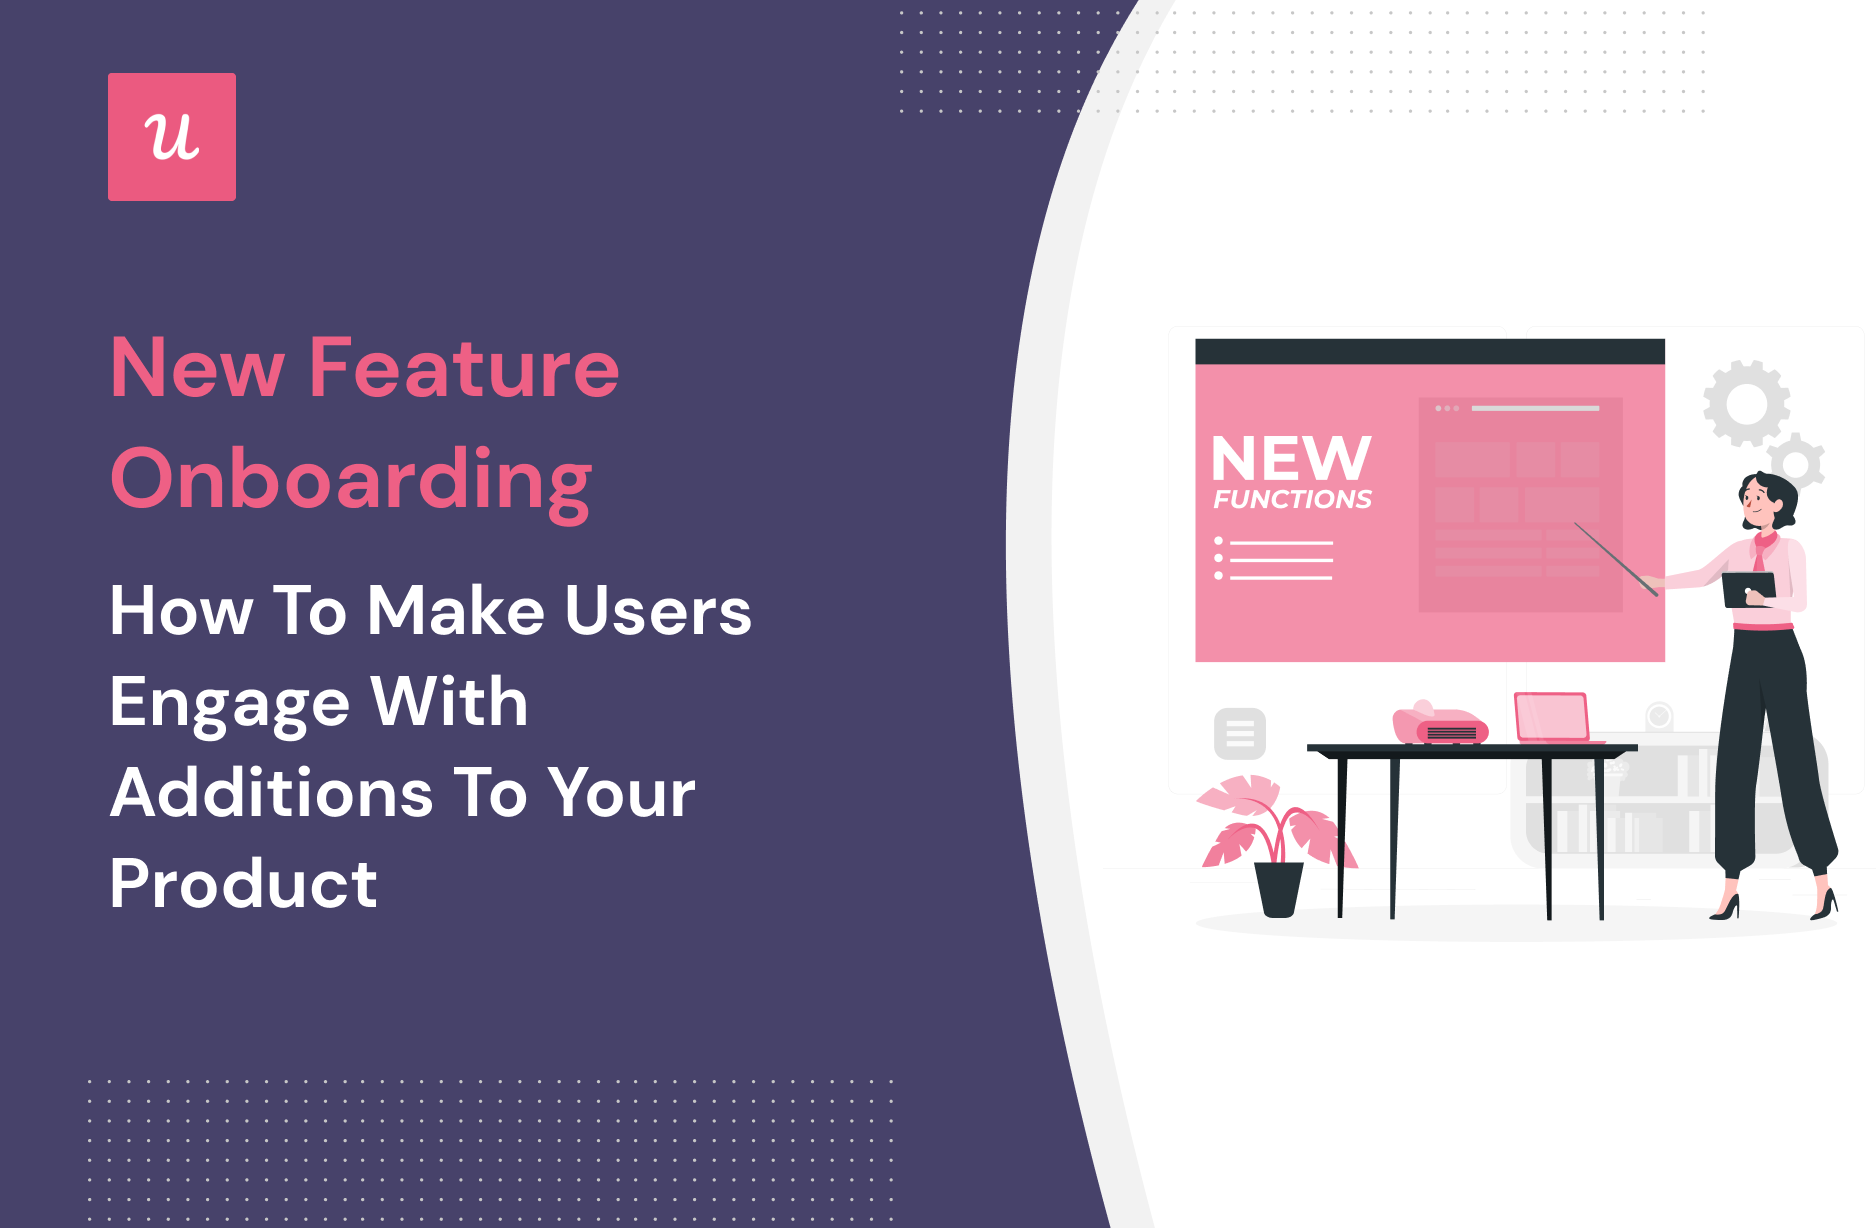 New-Feature-Onboarding-How-To-Make-Users-Engage-With-Additions-to-Your-Product